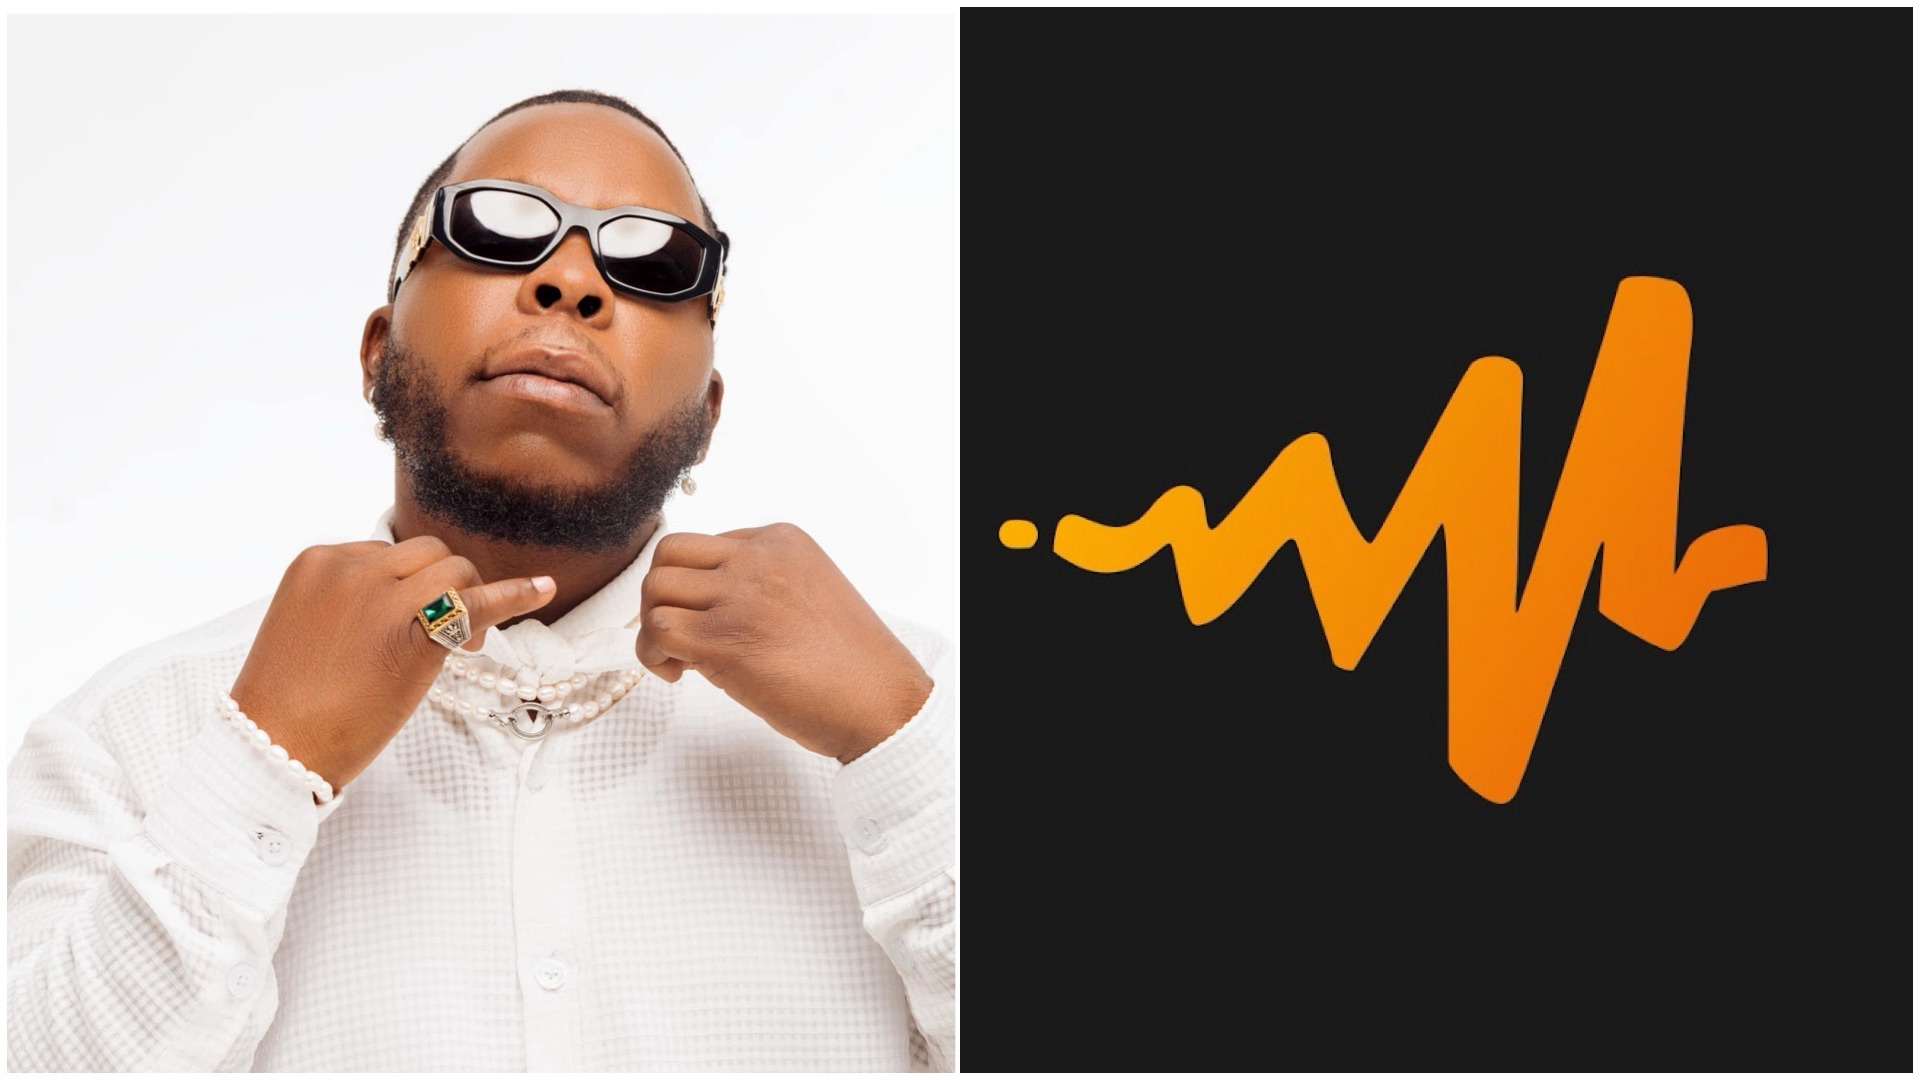 Edem and Audiomack announce exclusive partnership for new EP “Activado” release on June 4th